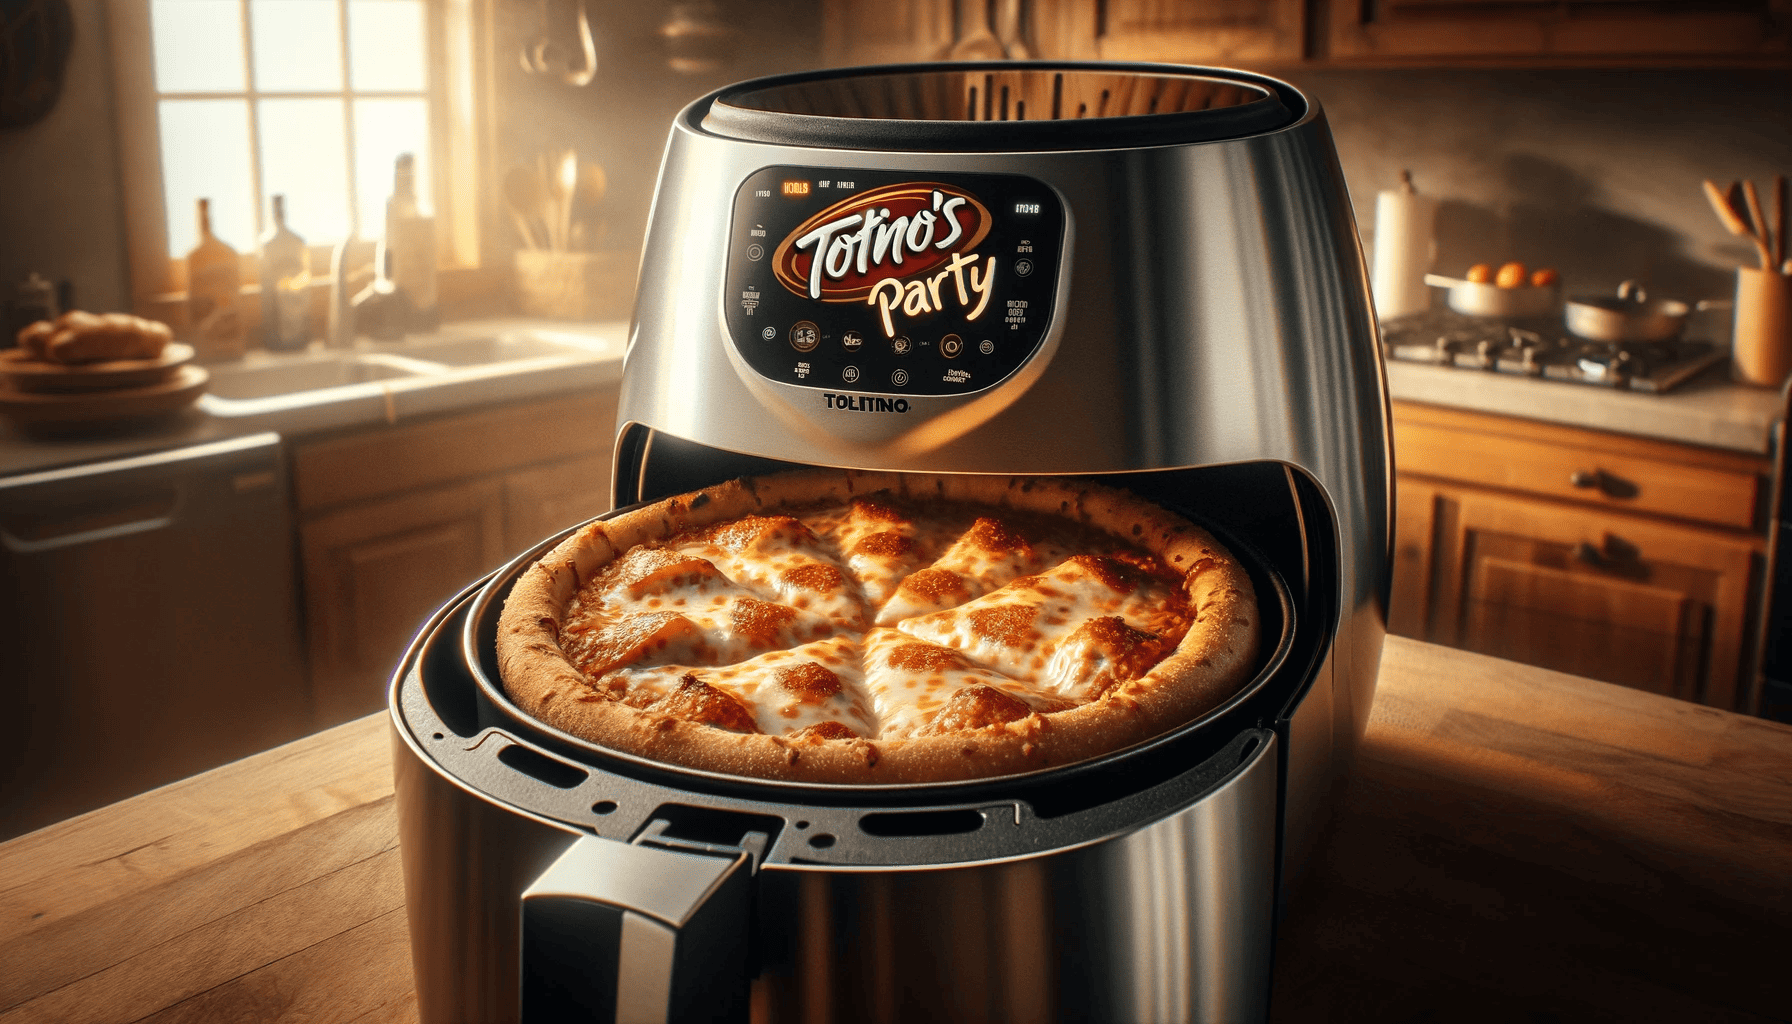 Air Fry Totino's Party Pizza: Craving Crispy, Cheesy Goodness?